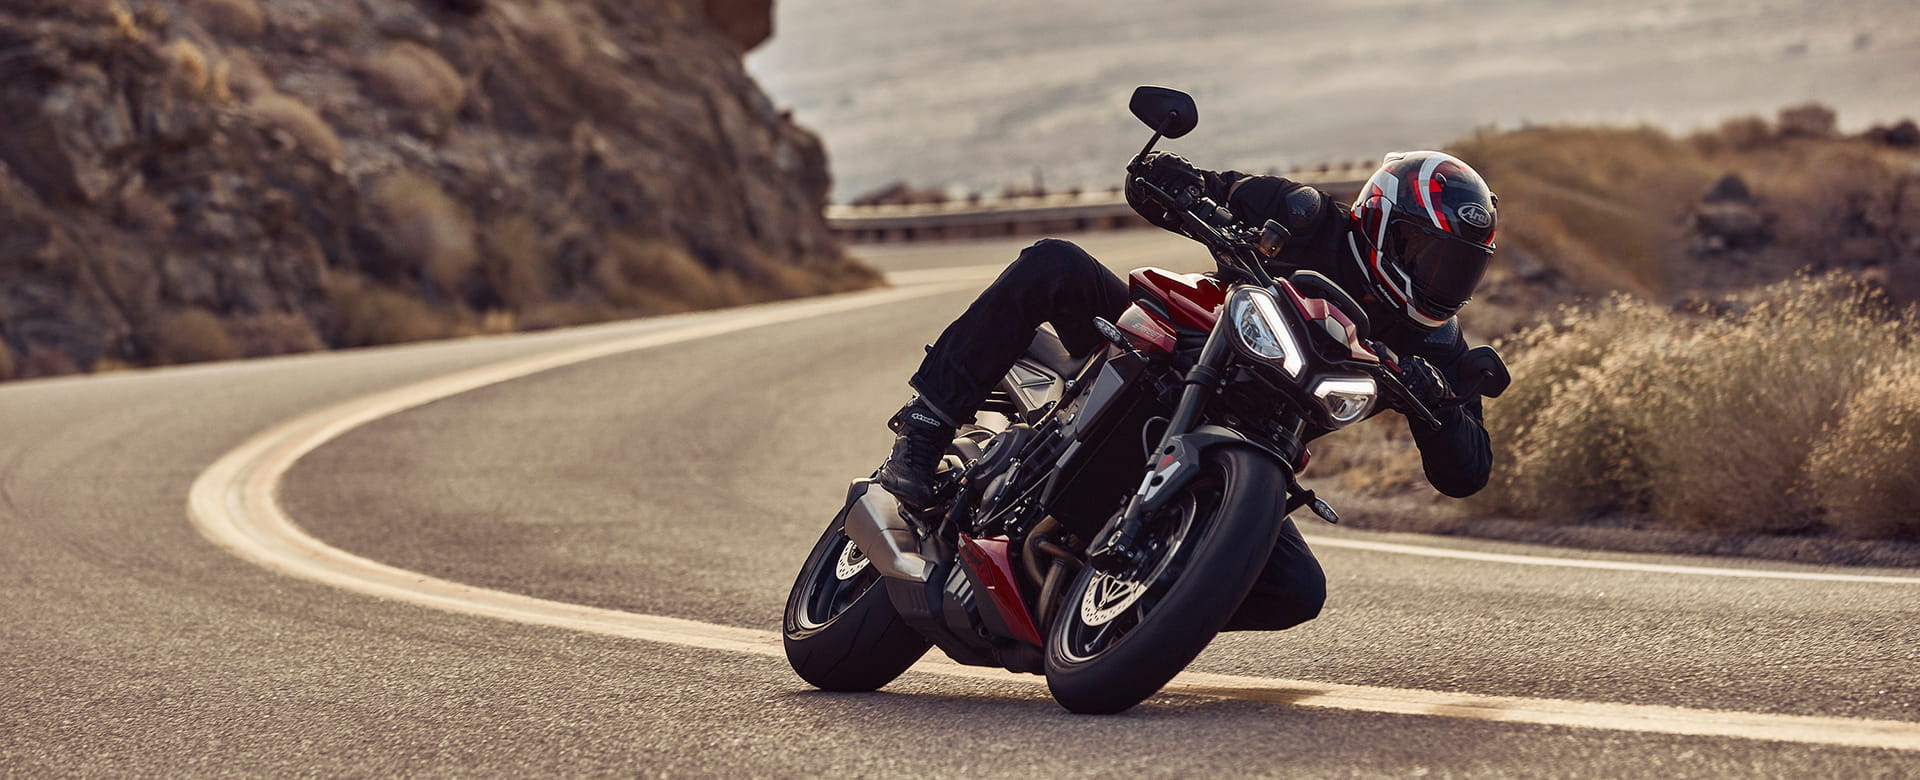 Street Triple 765 | For the Ride